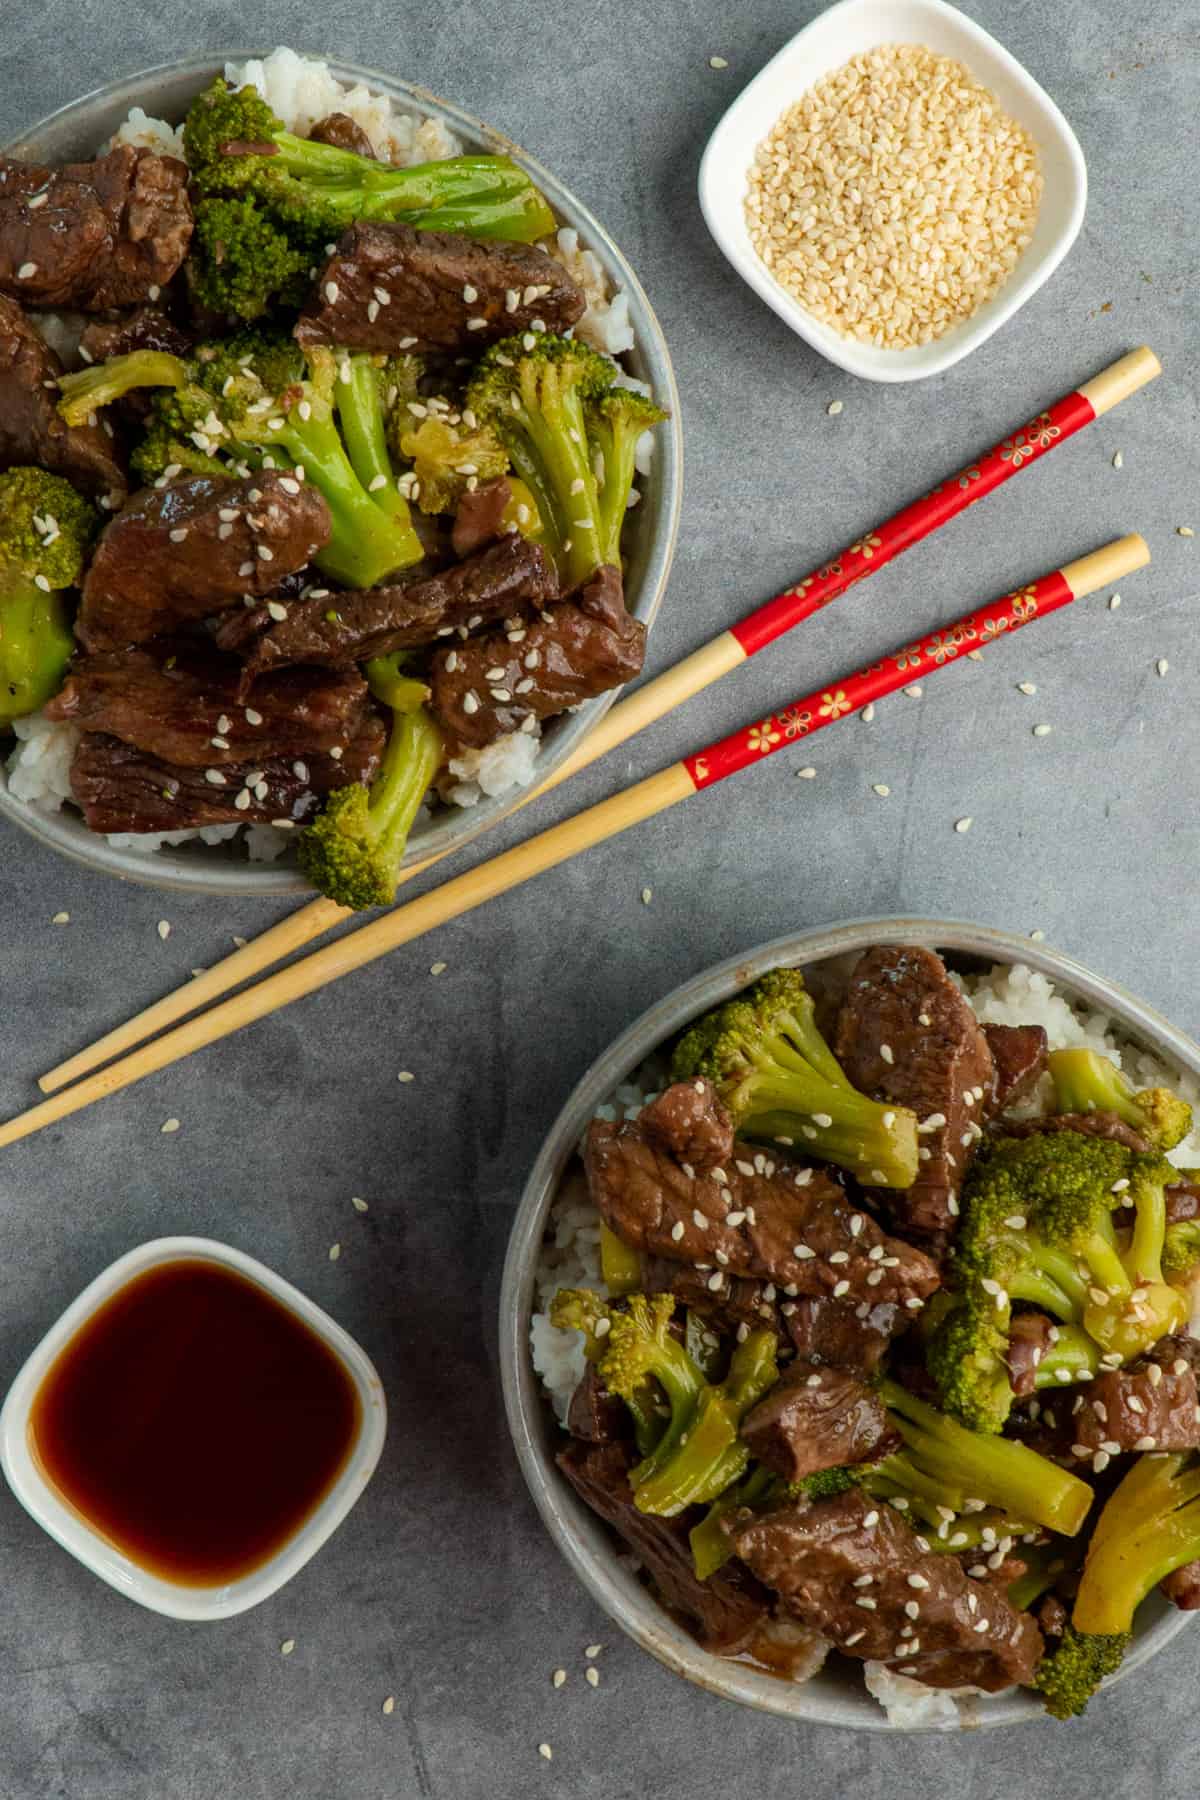 Over head look at two bowls of beef and broccoli with chop sticks in the middle.